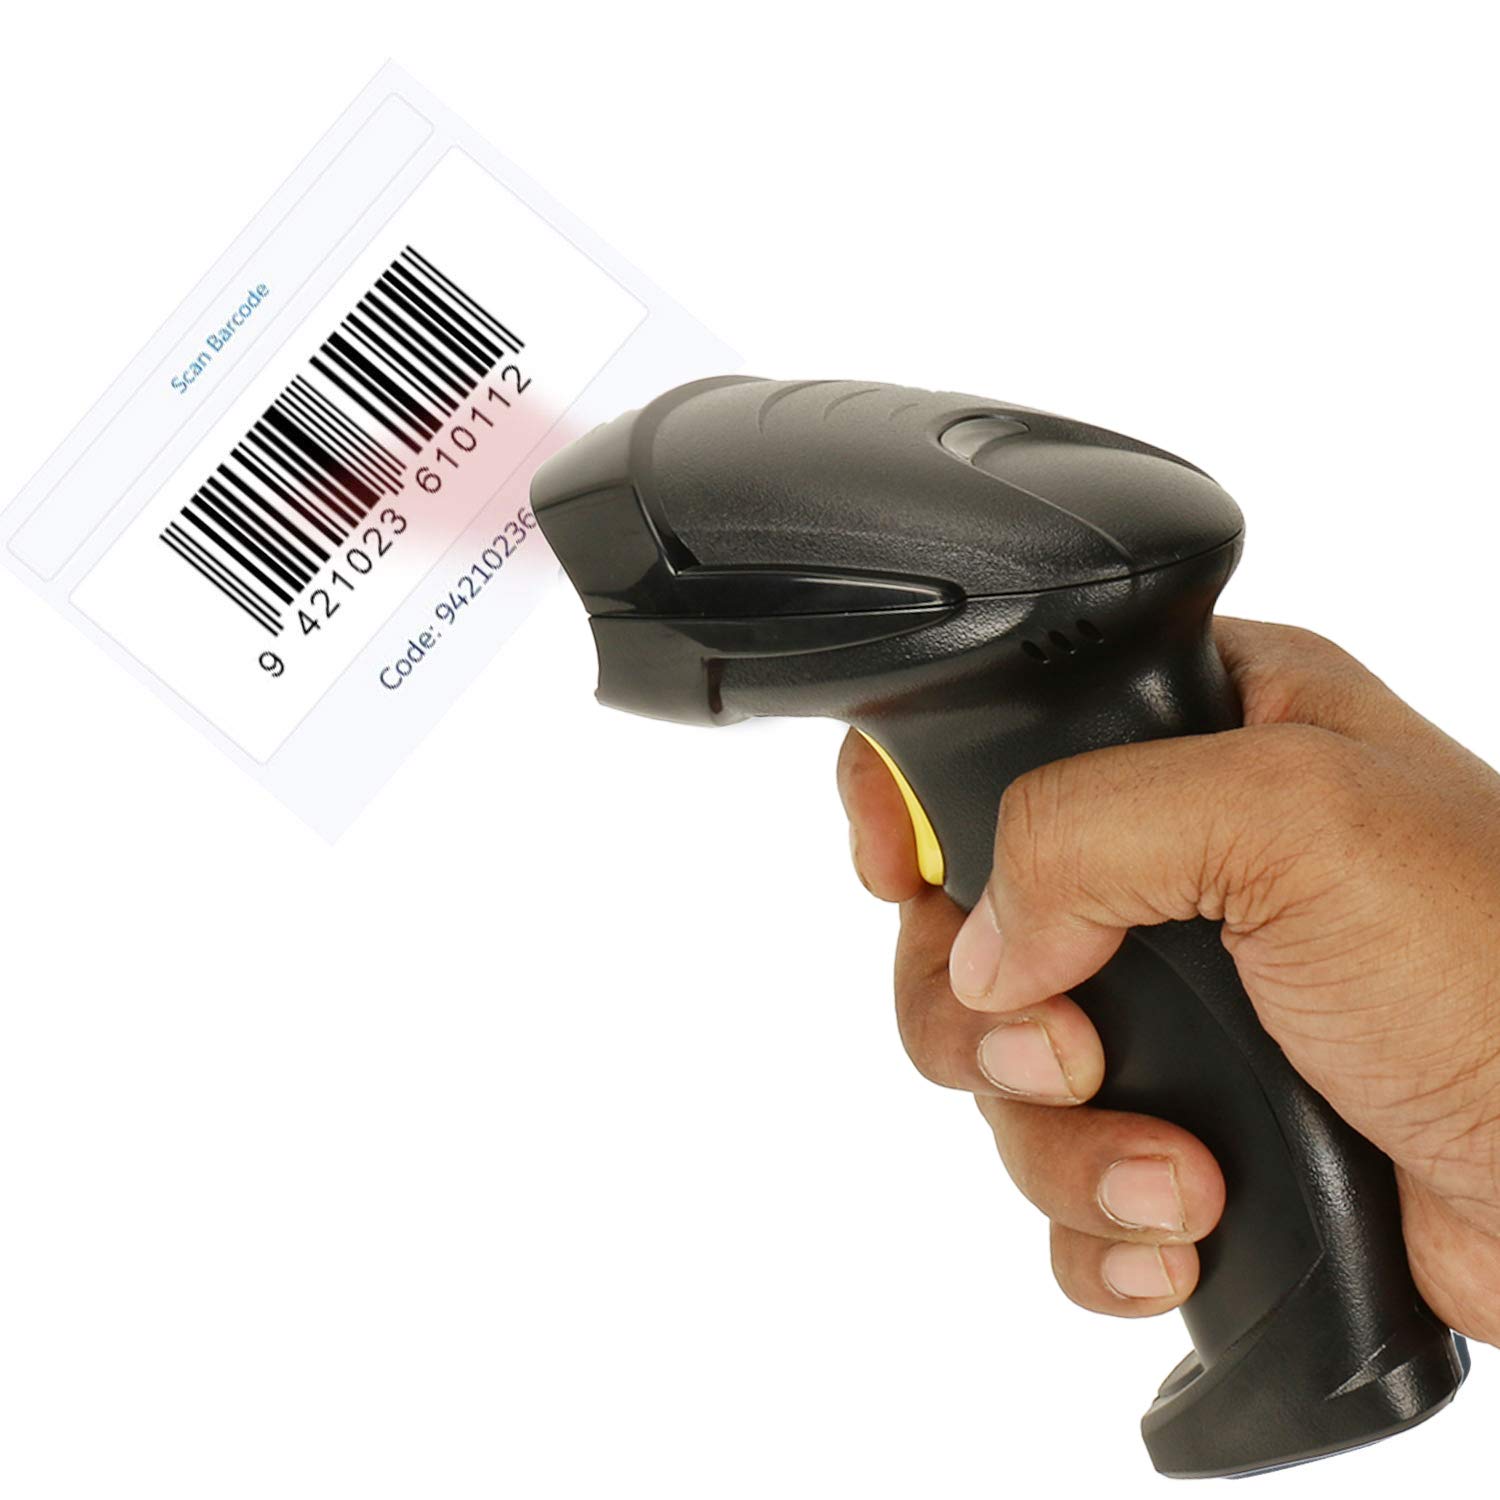 Get a First Class Barcode Printing Machine to Print Clear With All Details